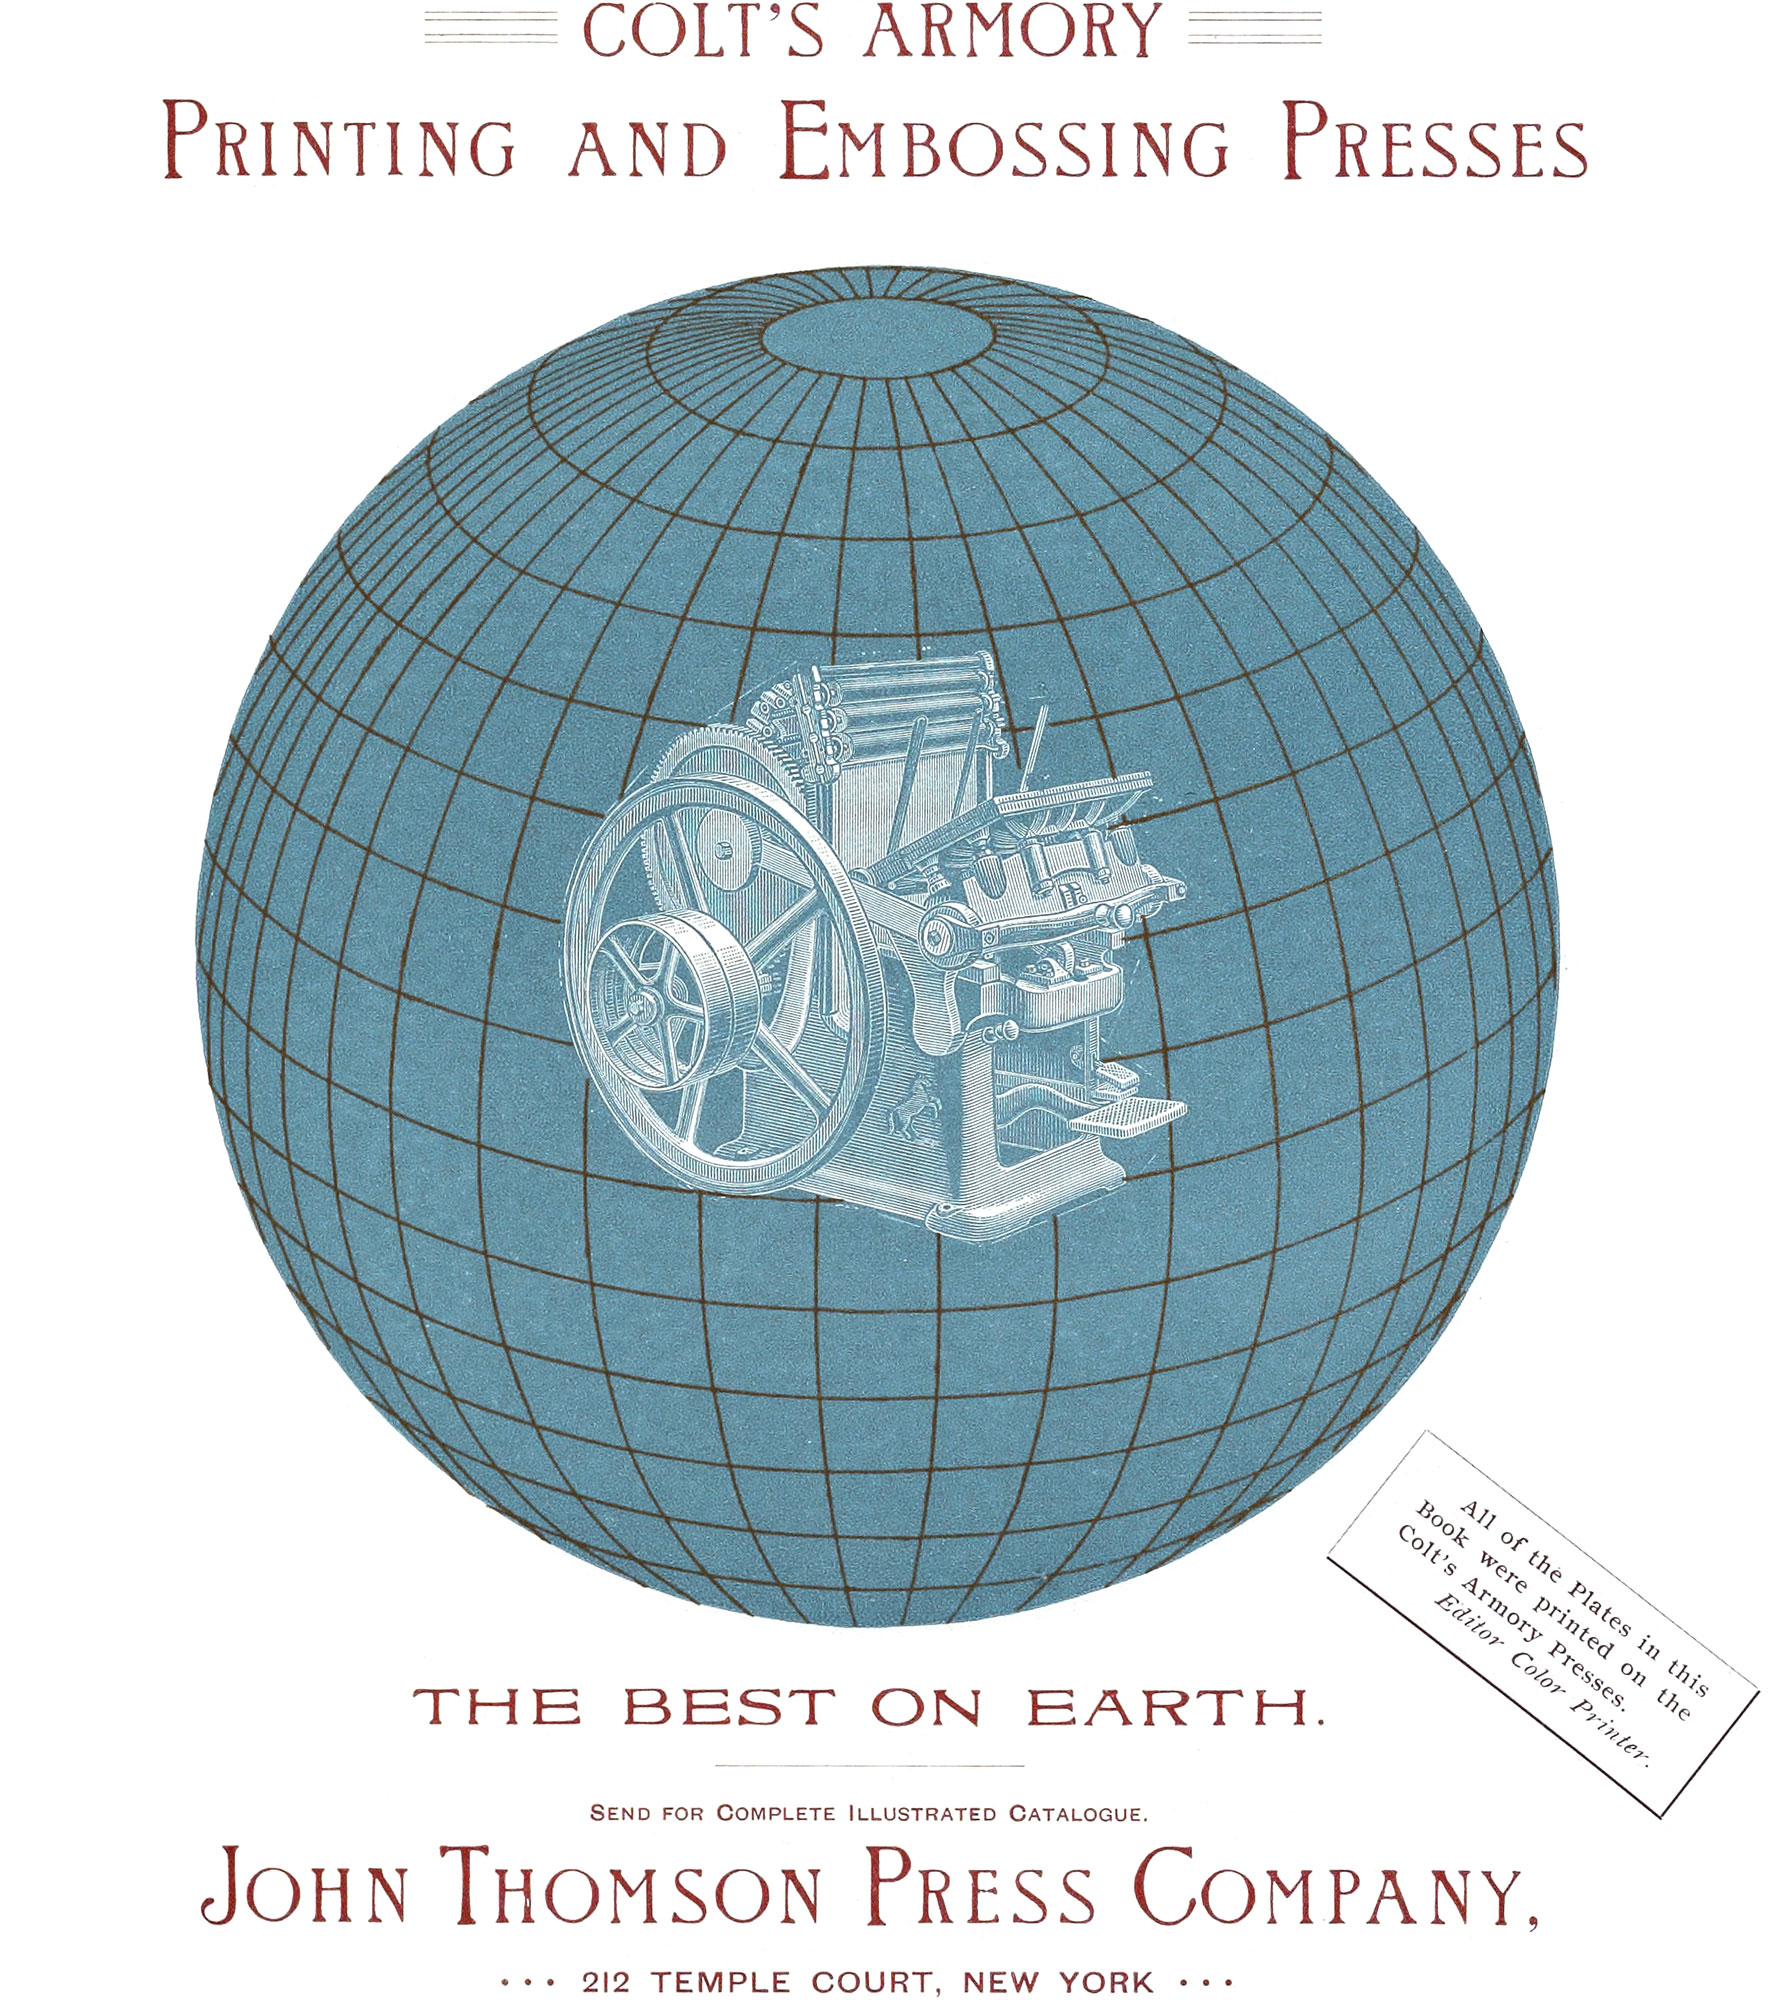 Sample flyer for printing and embossing press